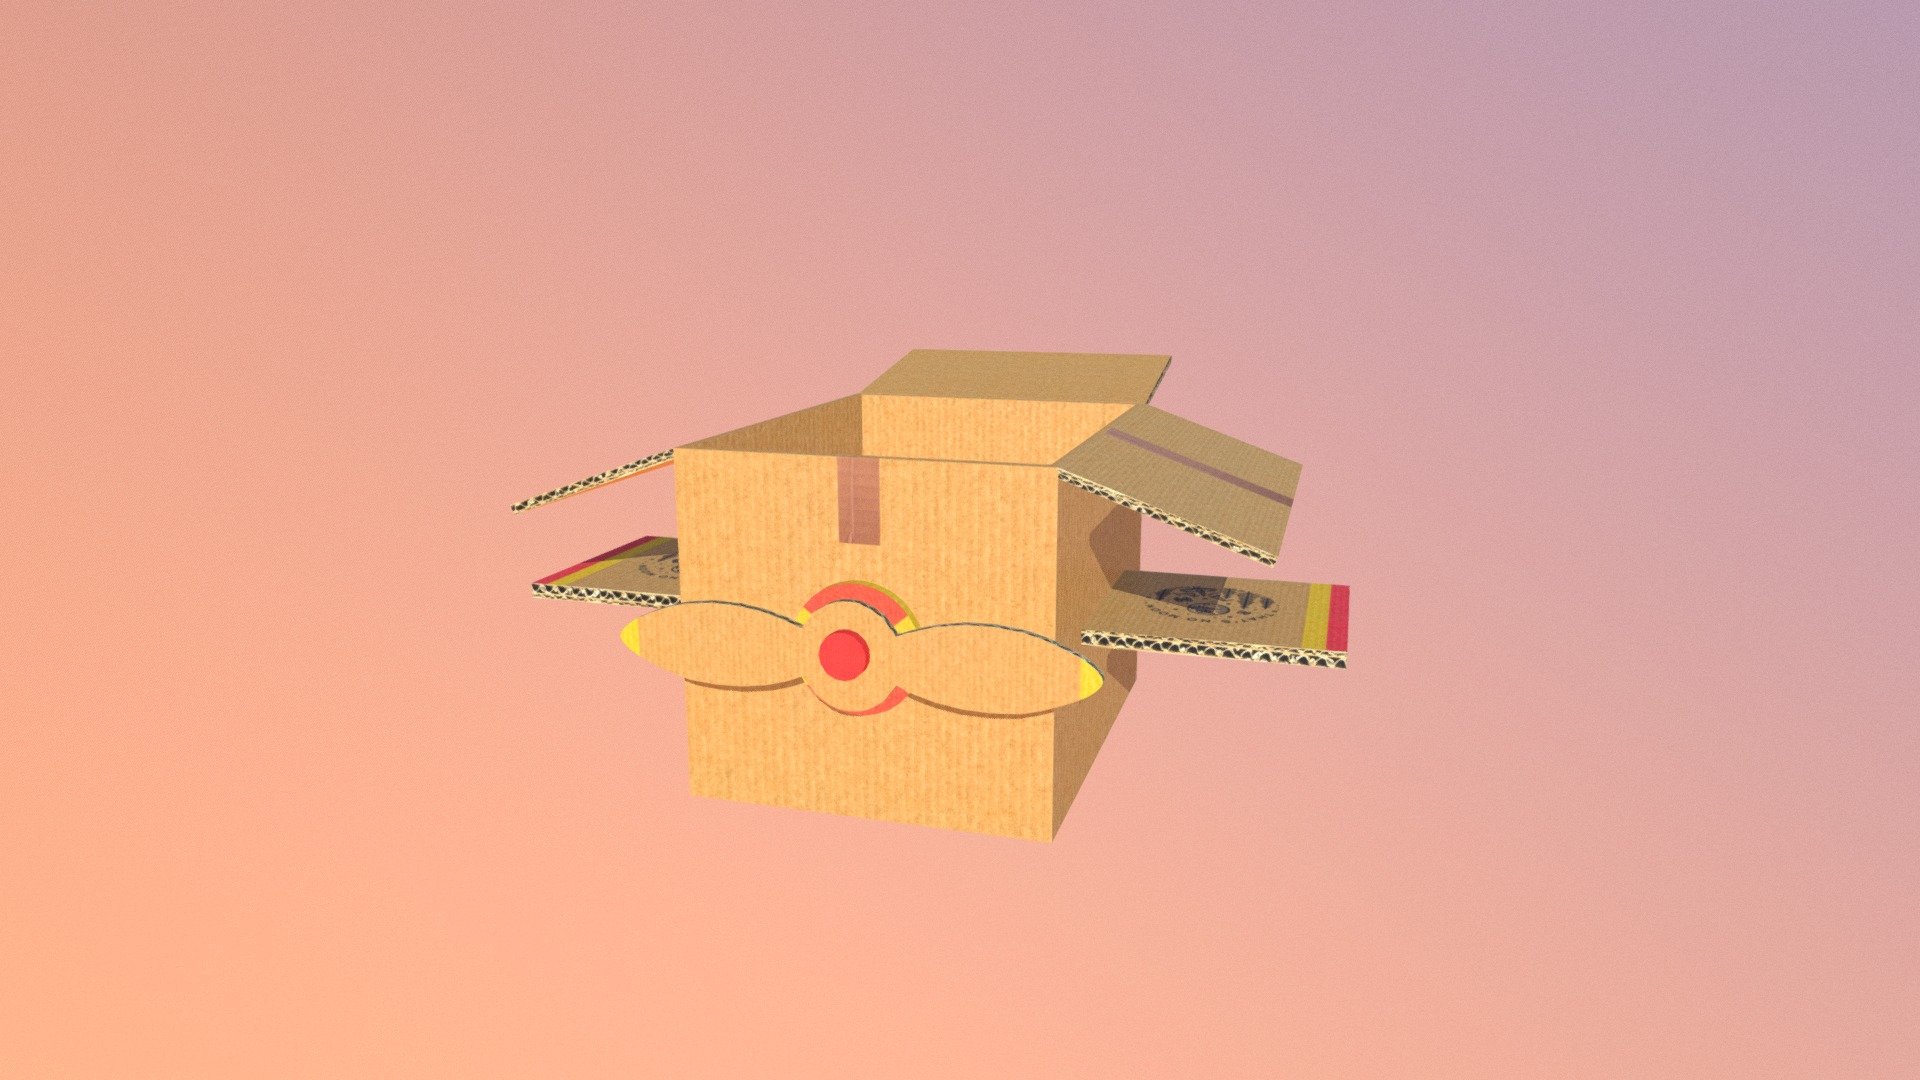 cardboard plane &lt;3
made for ships video game coming soon, I hope you like it - Cardboard plane <3 - 3D model by gamboso 3d model